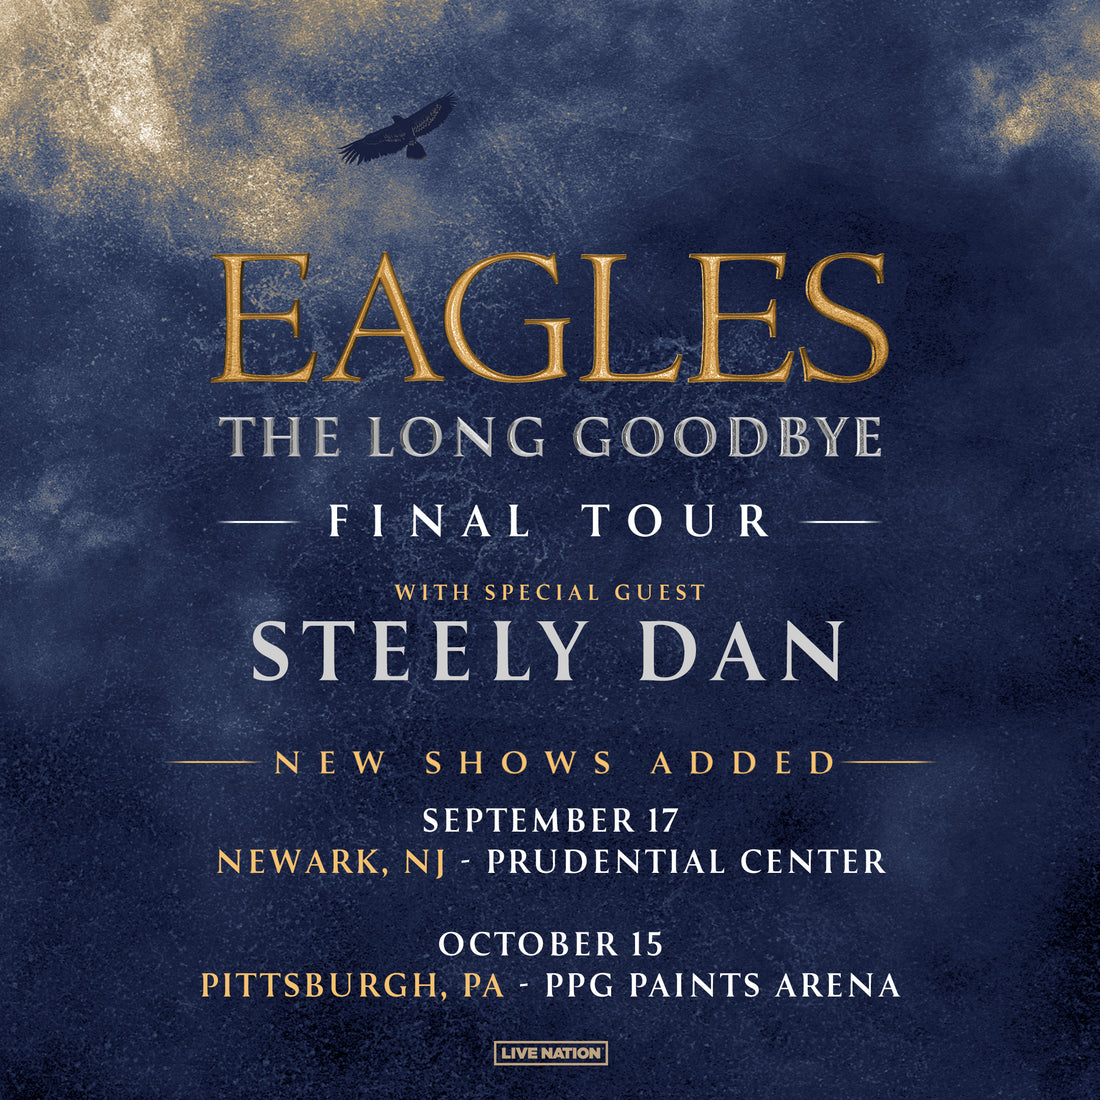 Eagles Announce New Dates to “The Long Goodbye” Tour